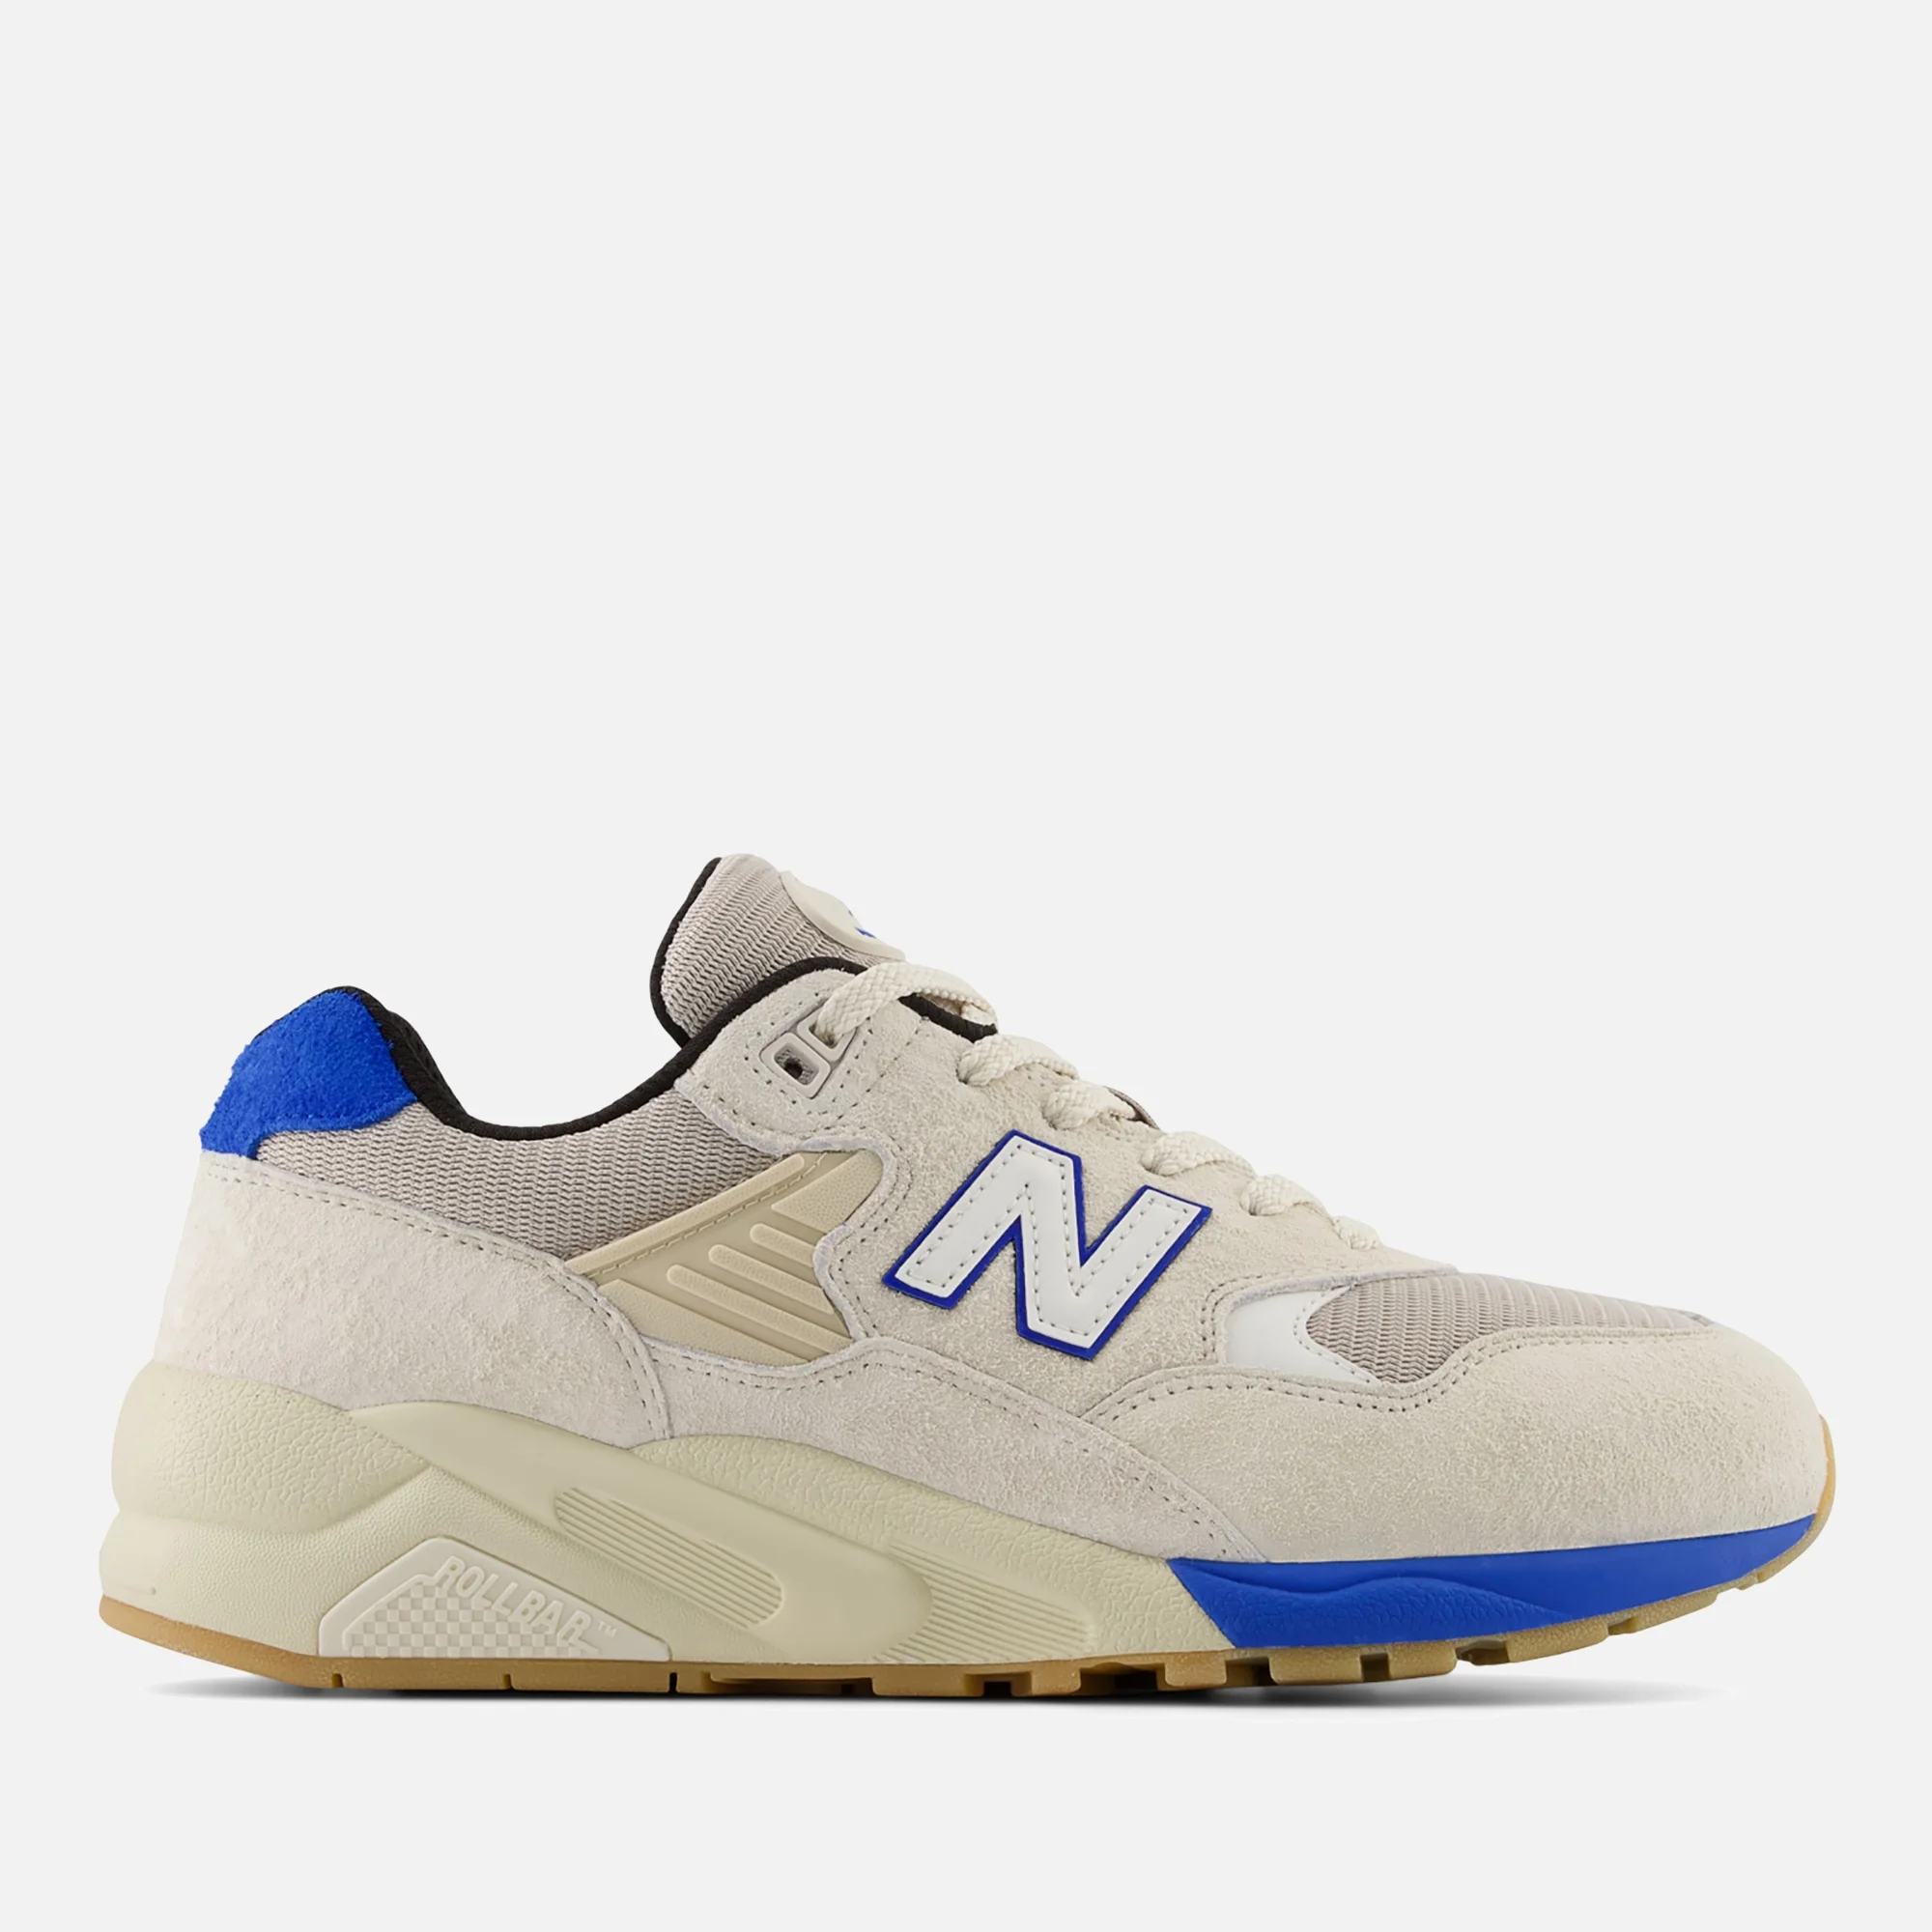 New Balance Men's 580 Suede and Mesh Trainers Image 1